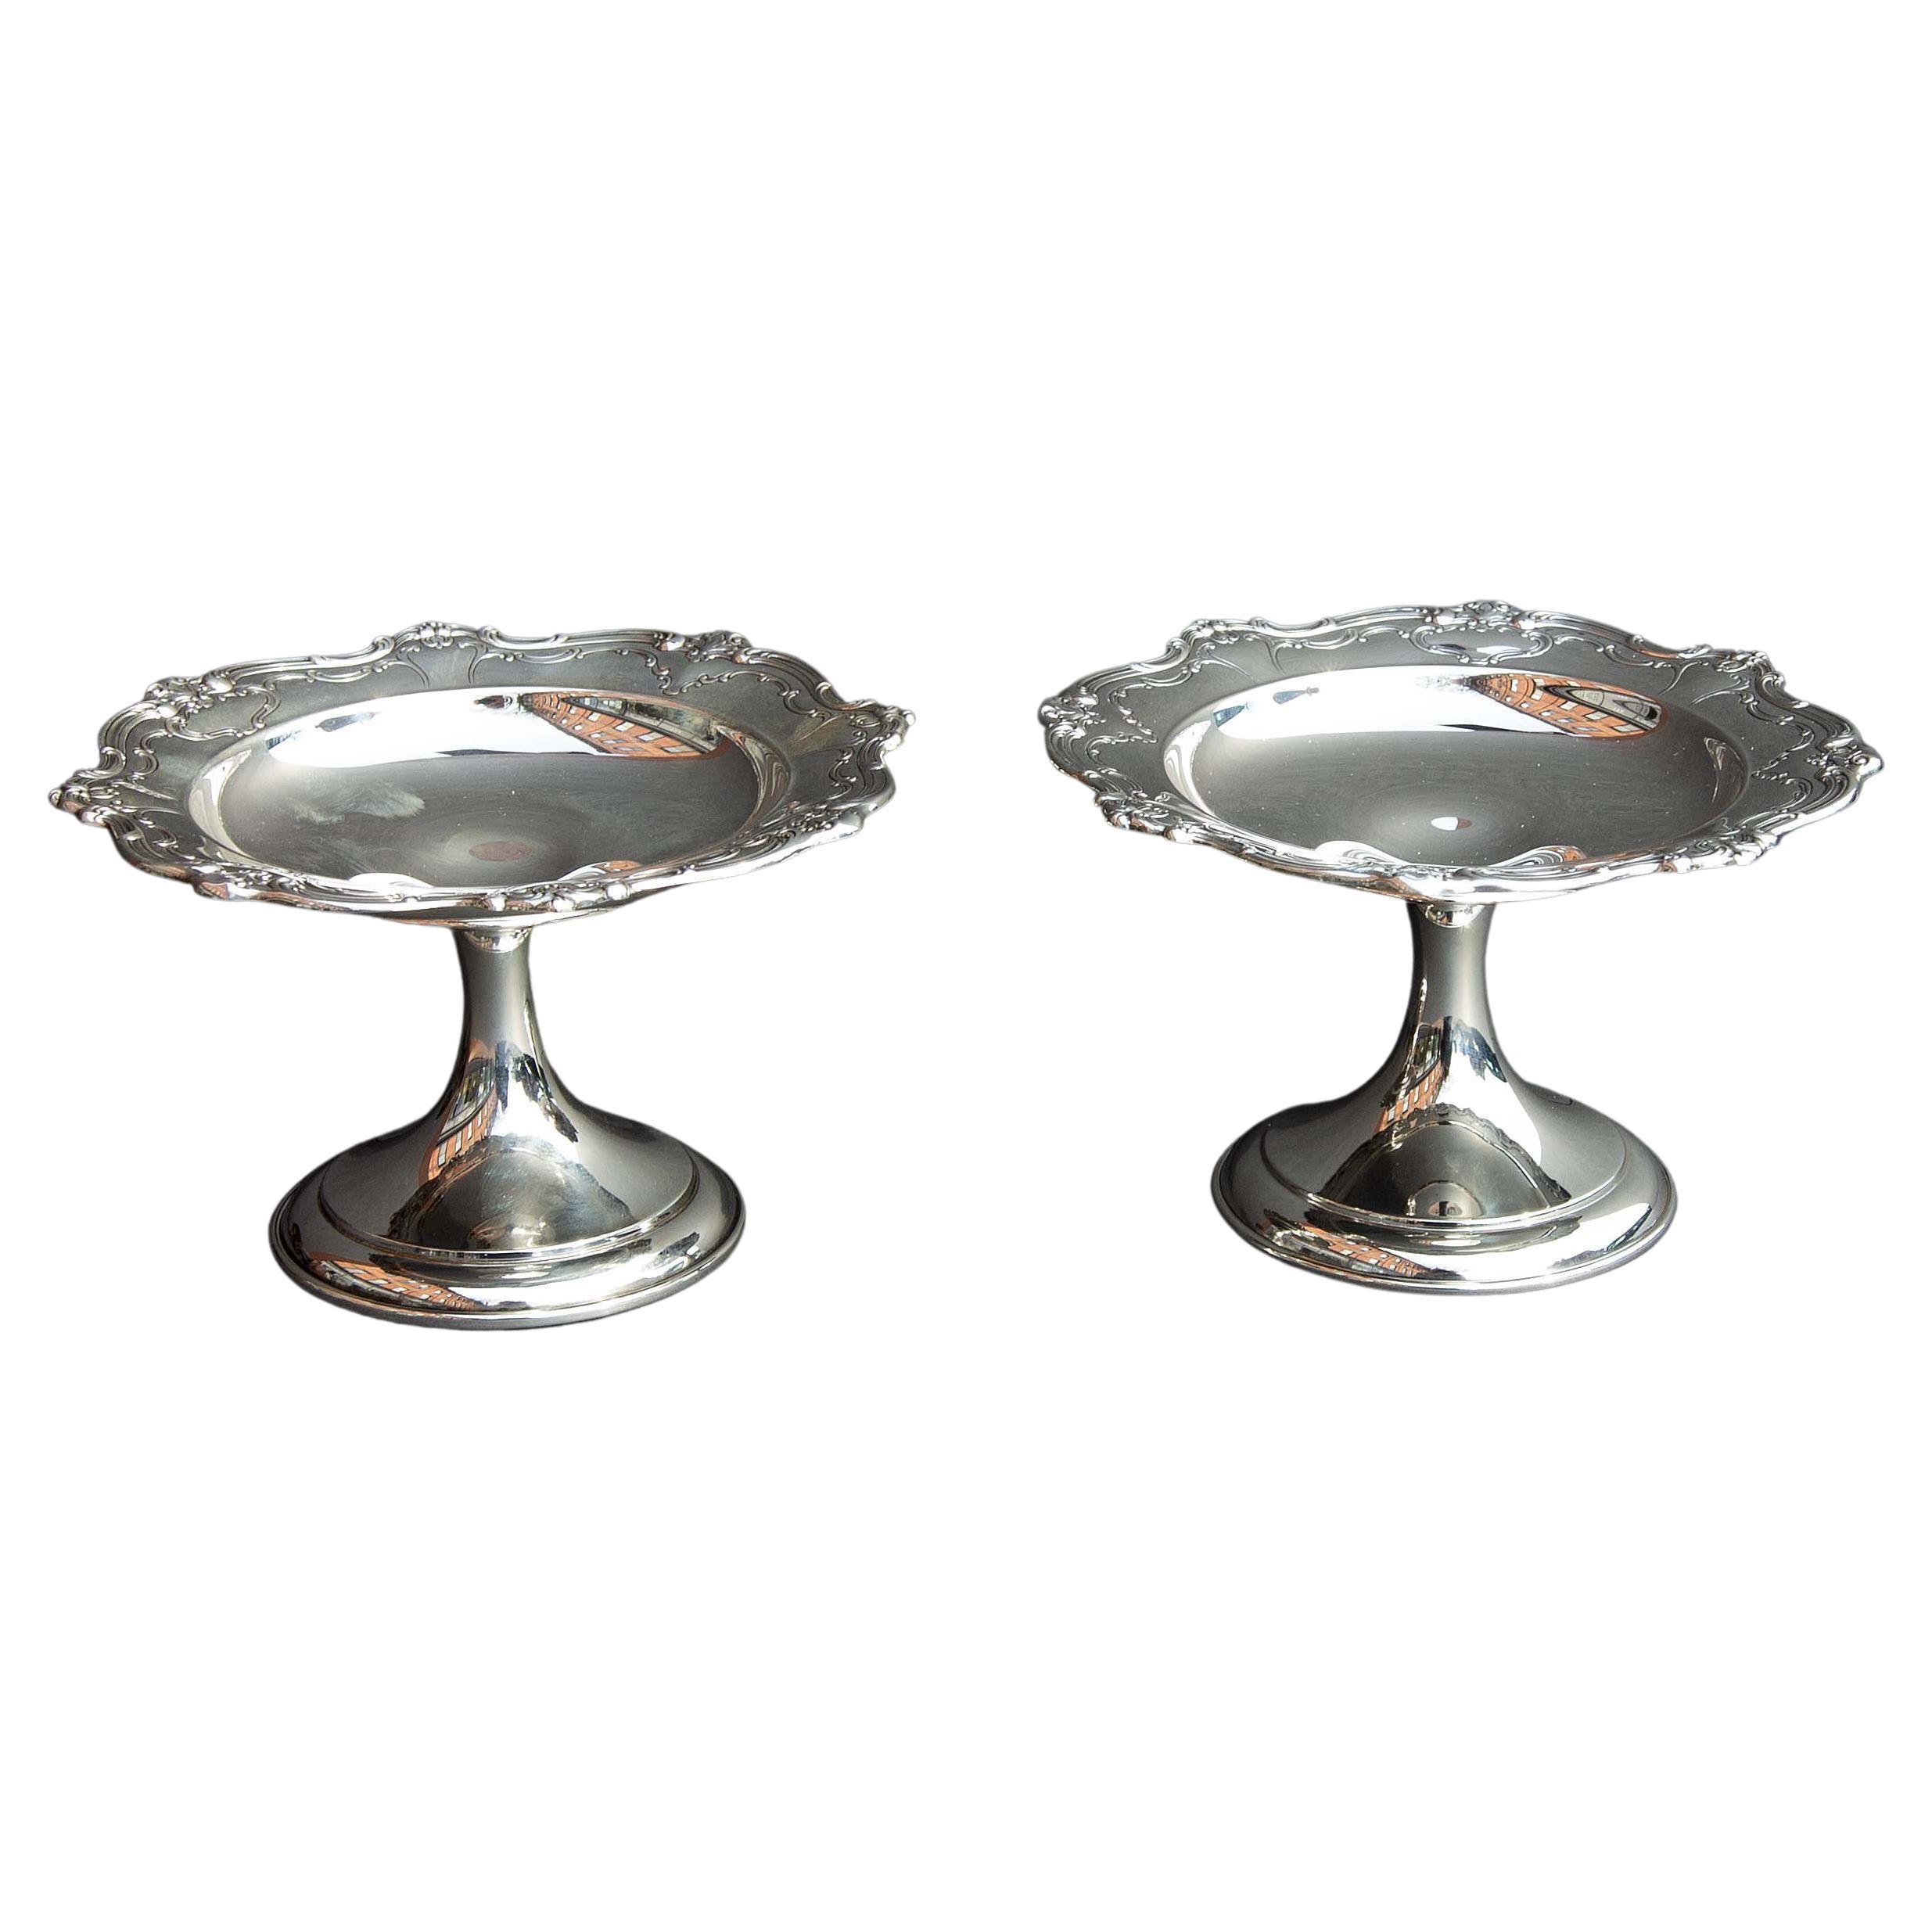 Pair Chantilly Sterling Compotes by Gorham